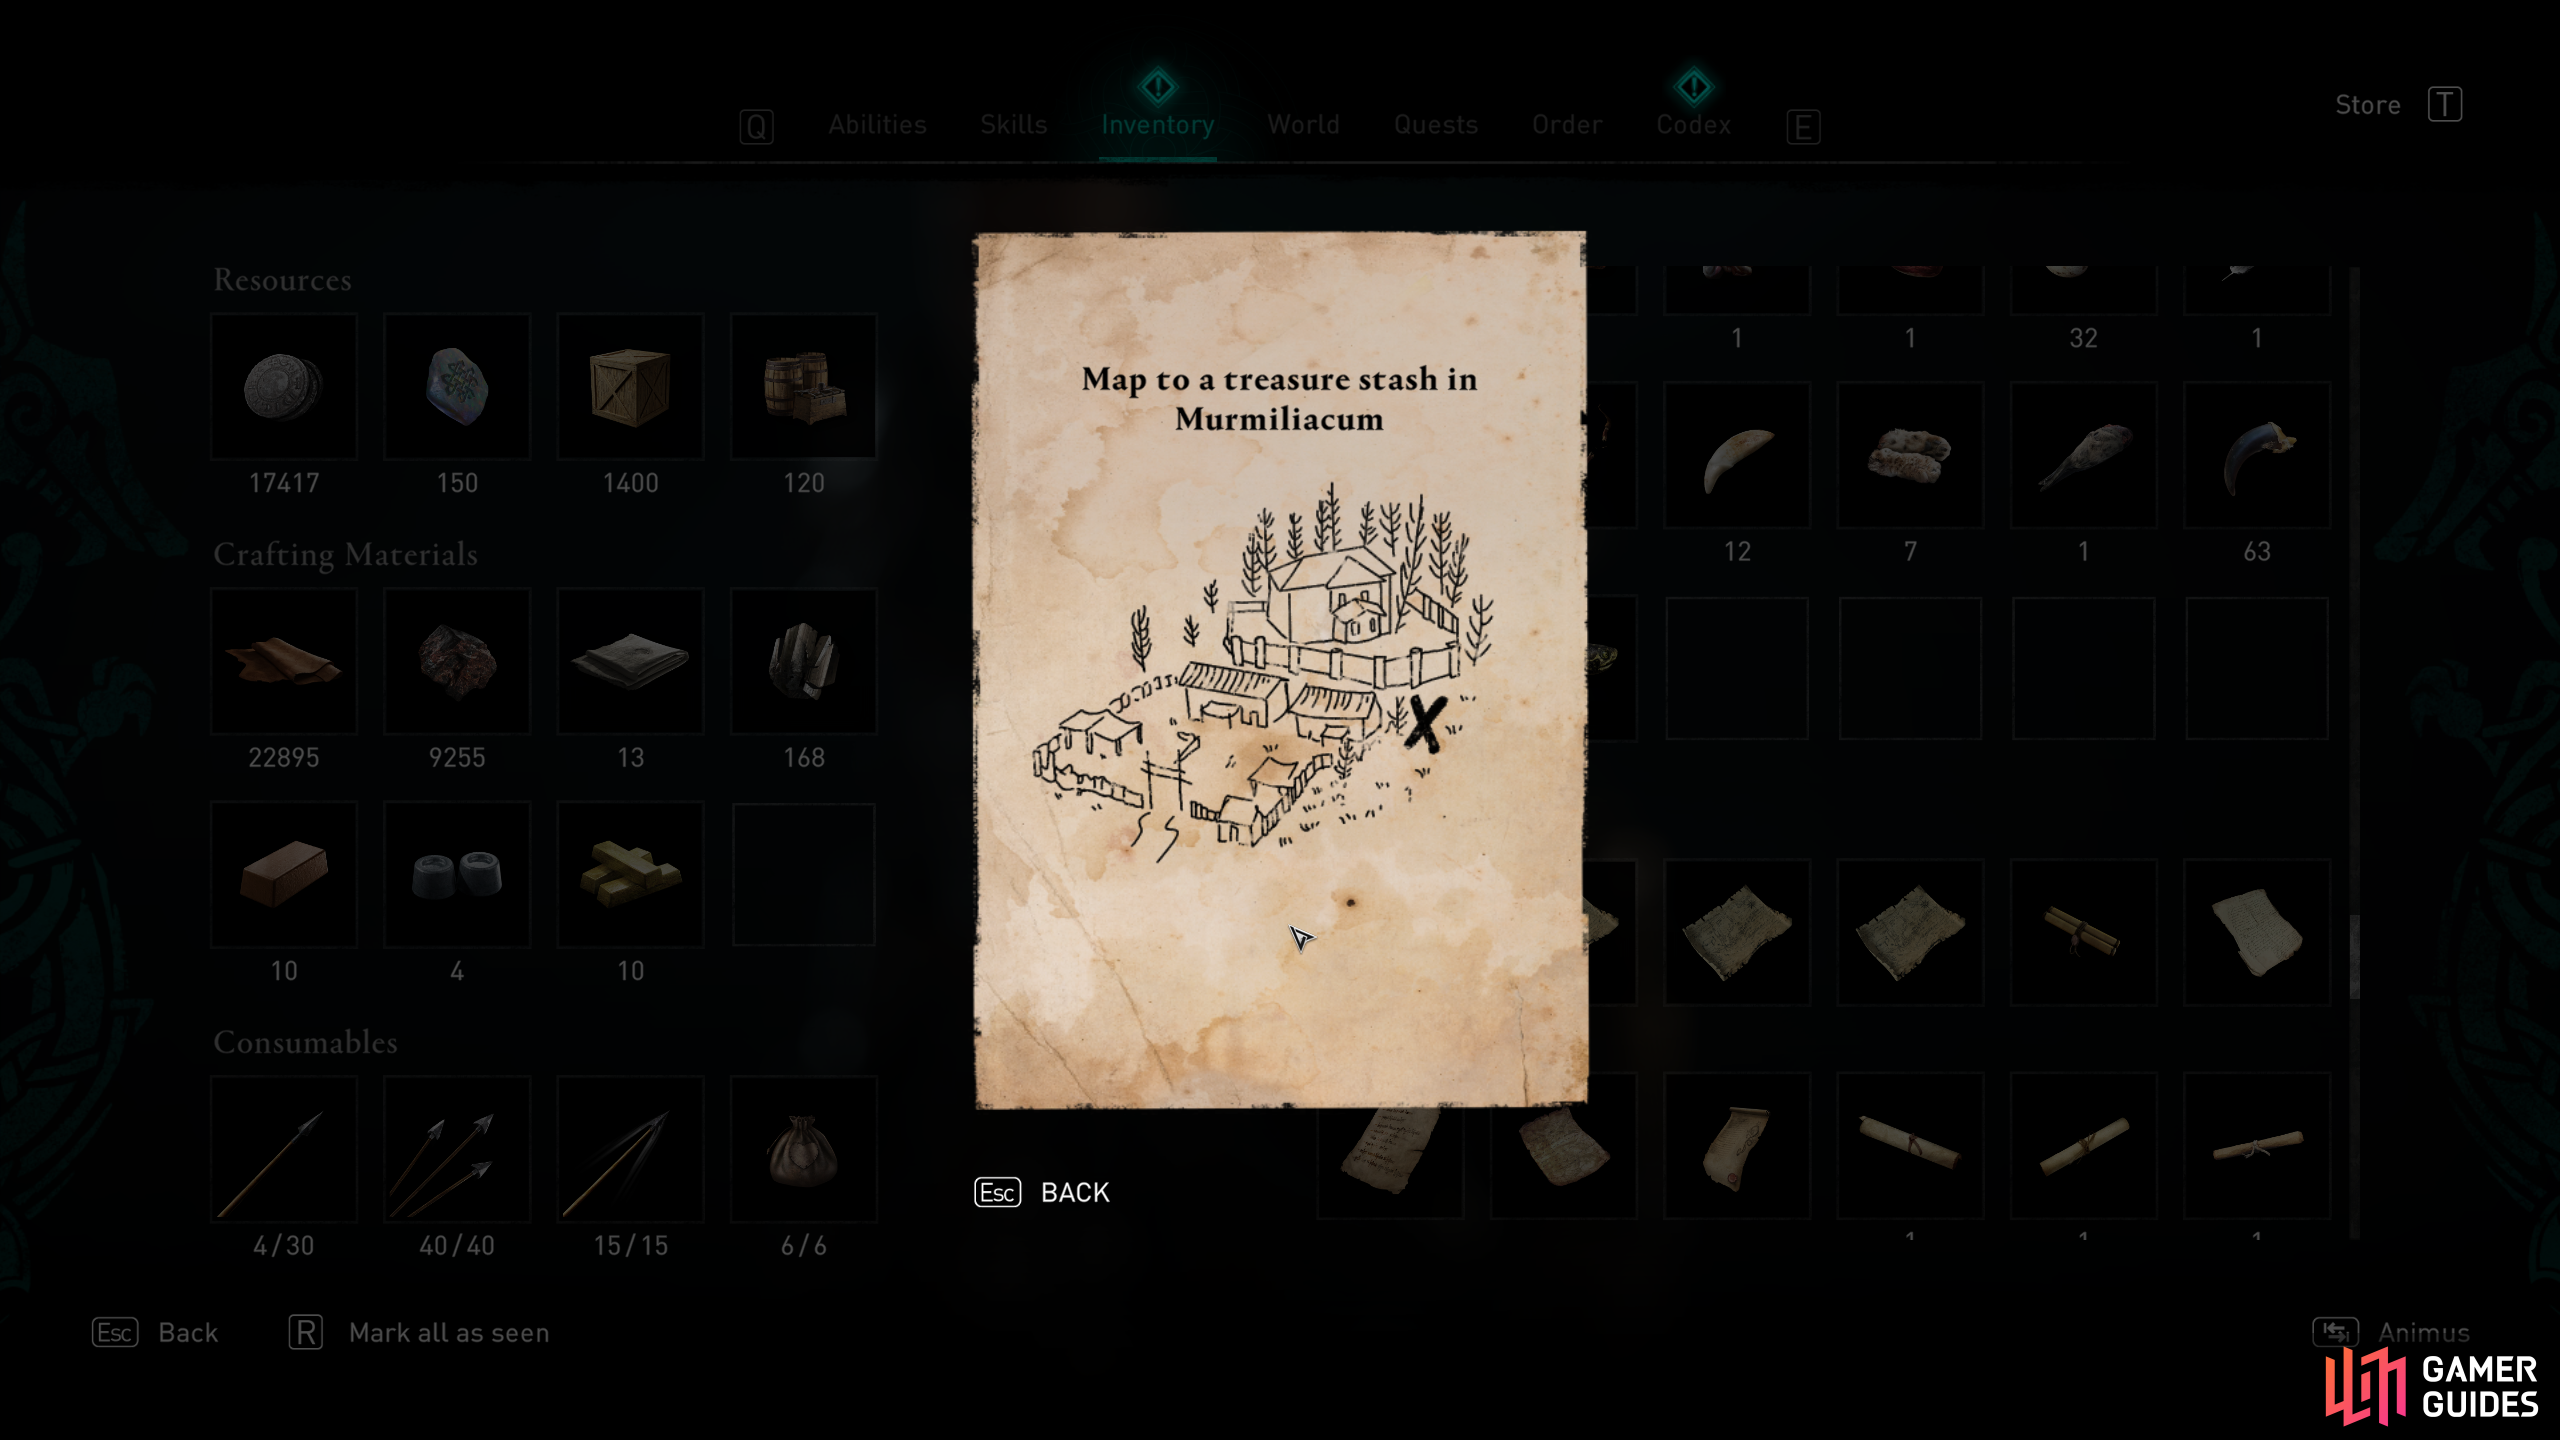 You'll find the map in your inventory, indicating where the treasure can be found.